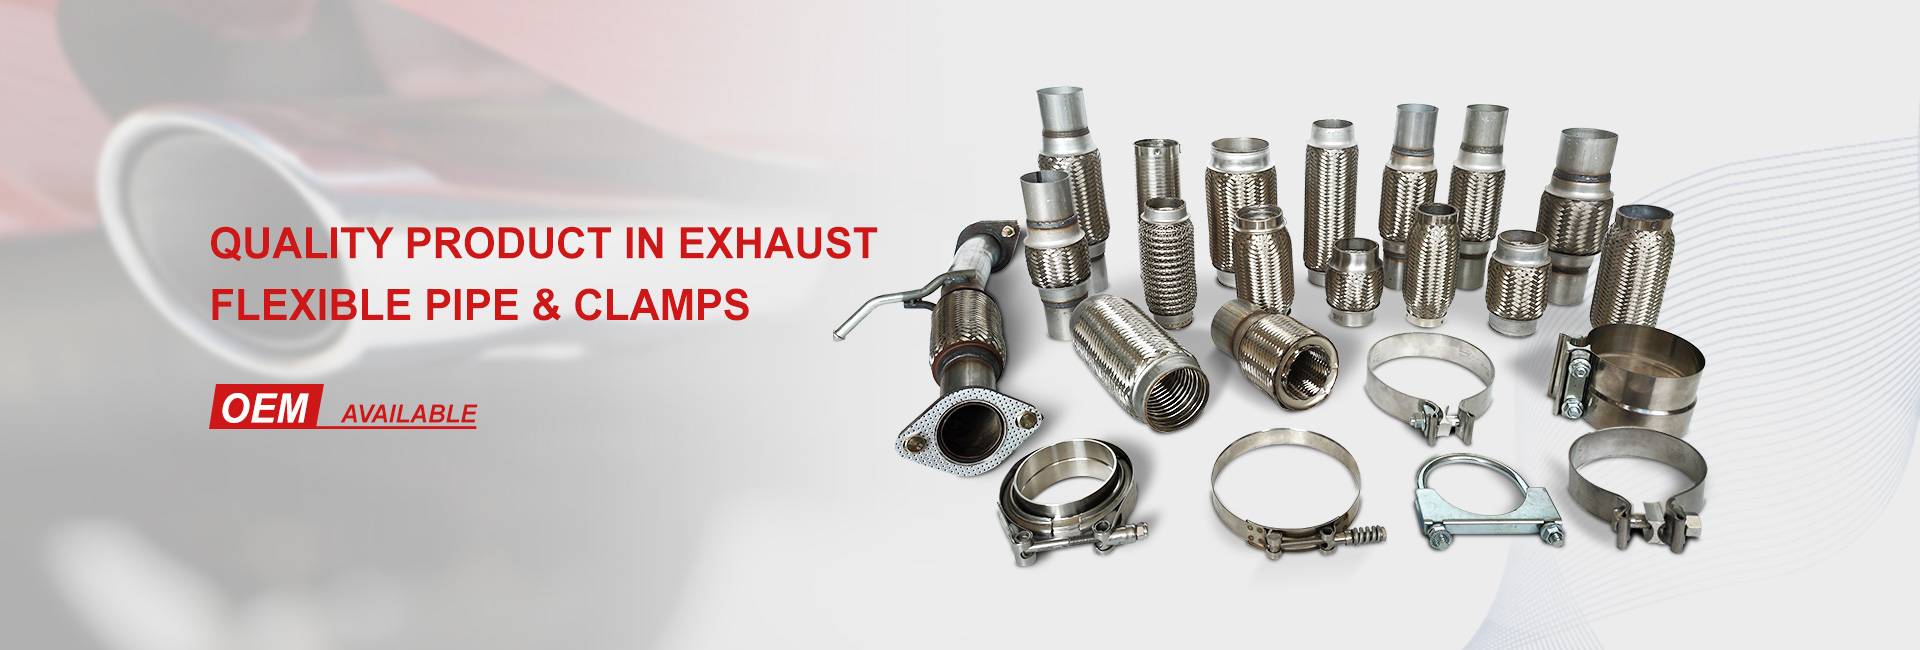 Quality Product in Exhaust  Flexible Pipe & Clamps